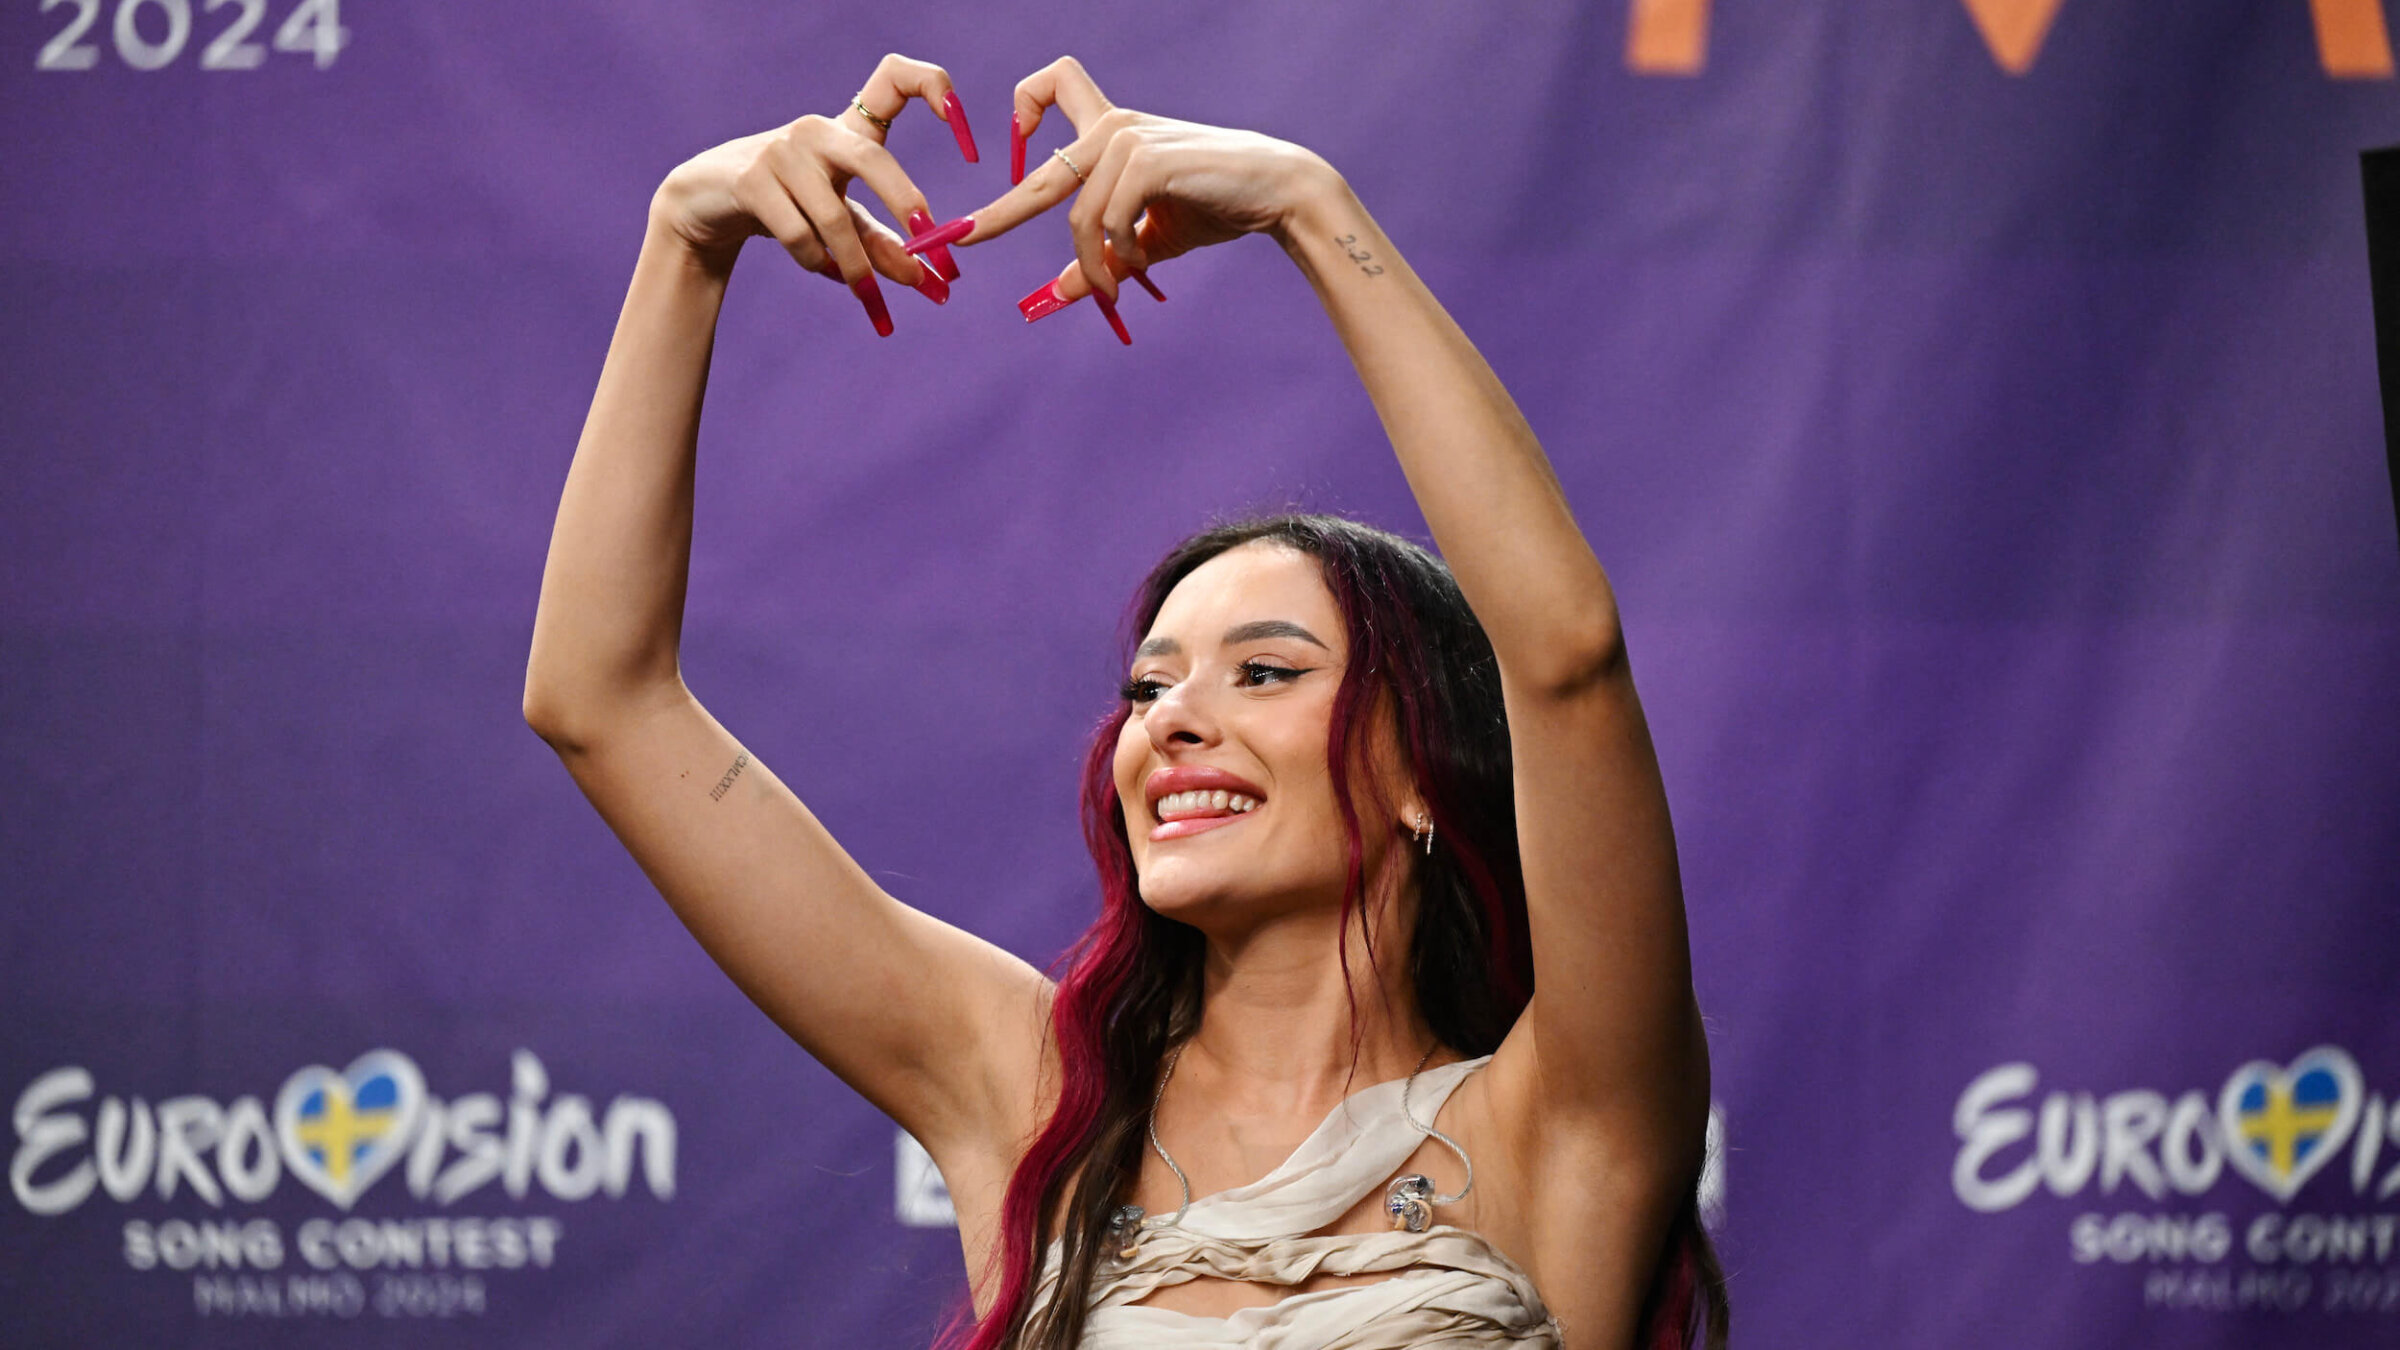 Eden Golan of Israel celebrated during a Thursday press conference after qualifying for the Eurovision Song Contest Grand Final.